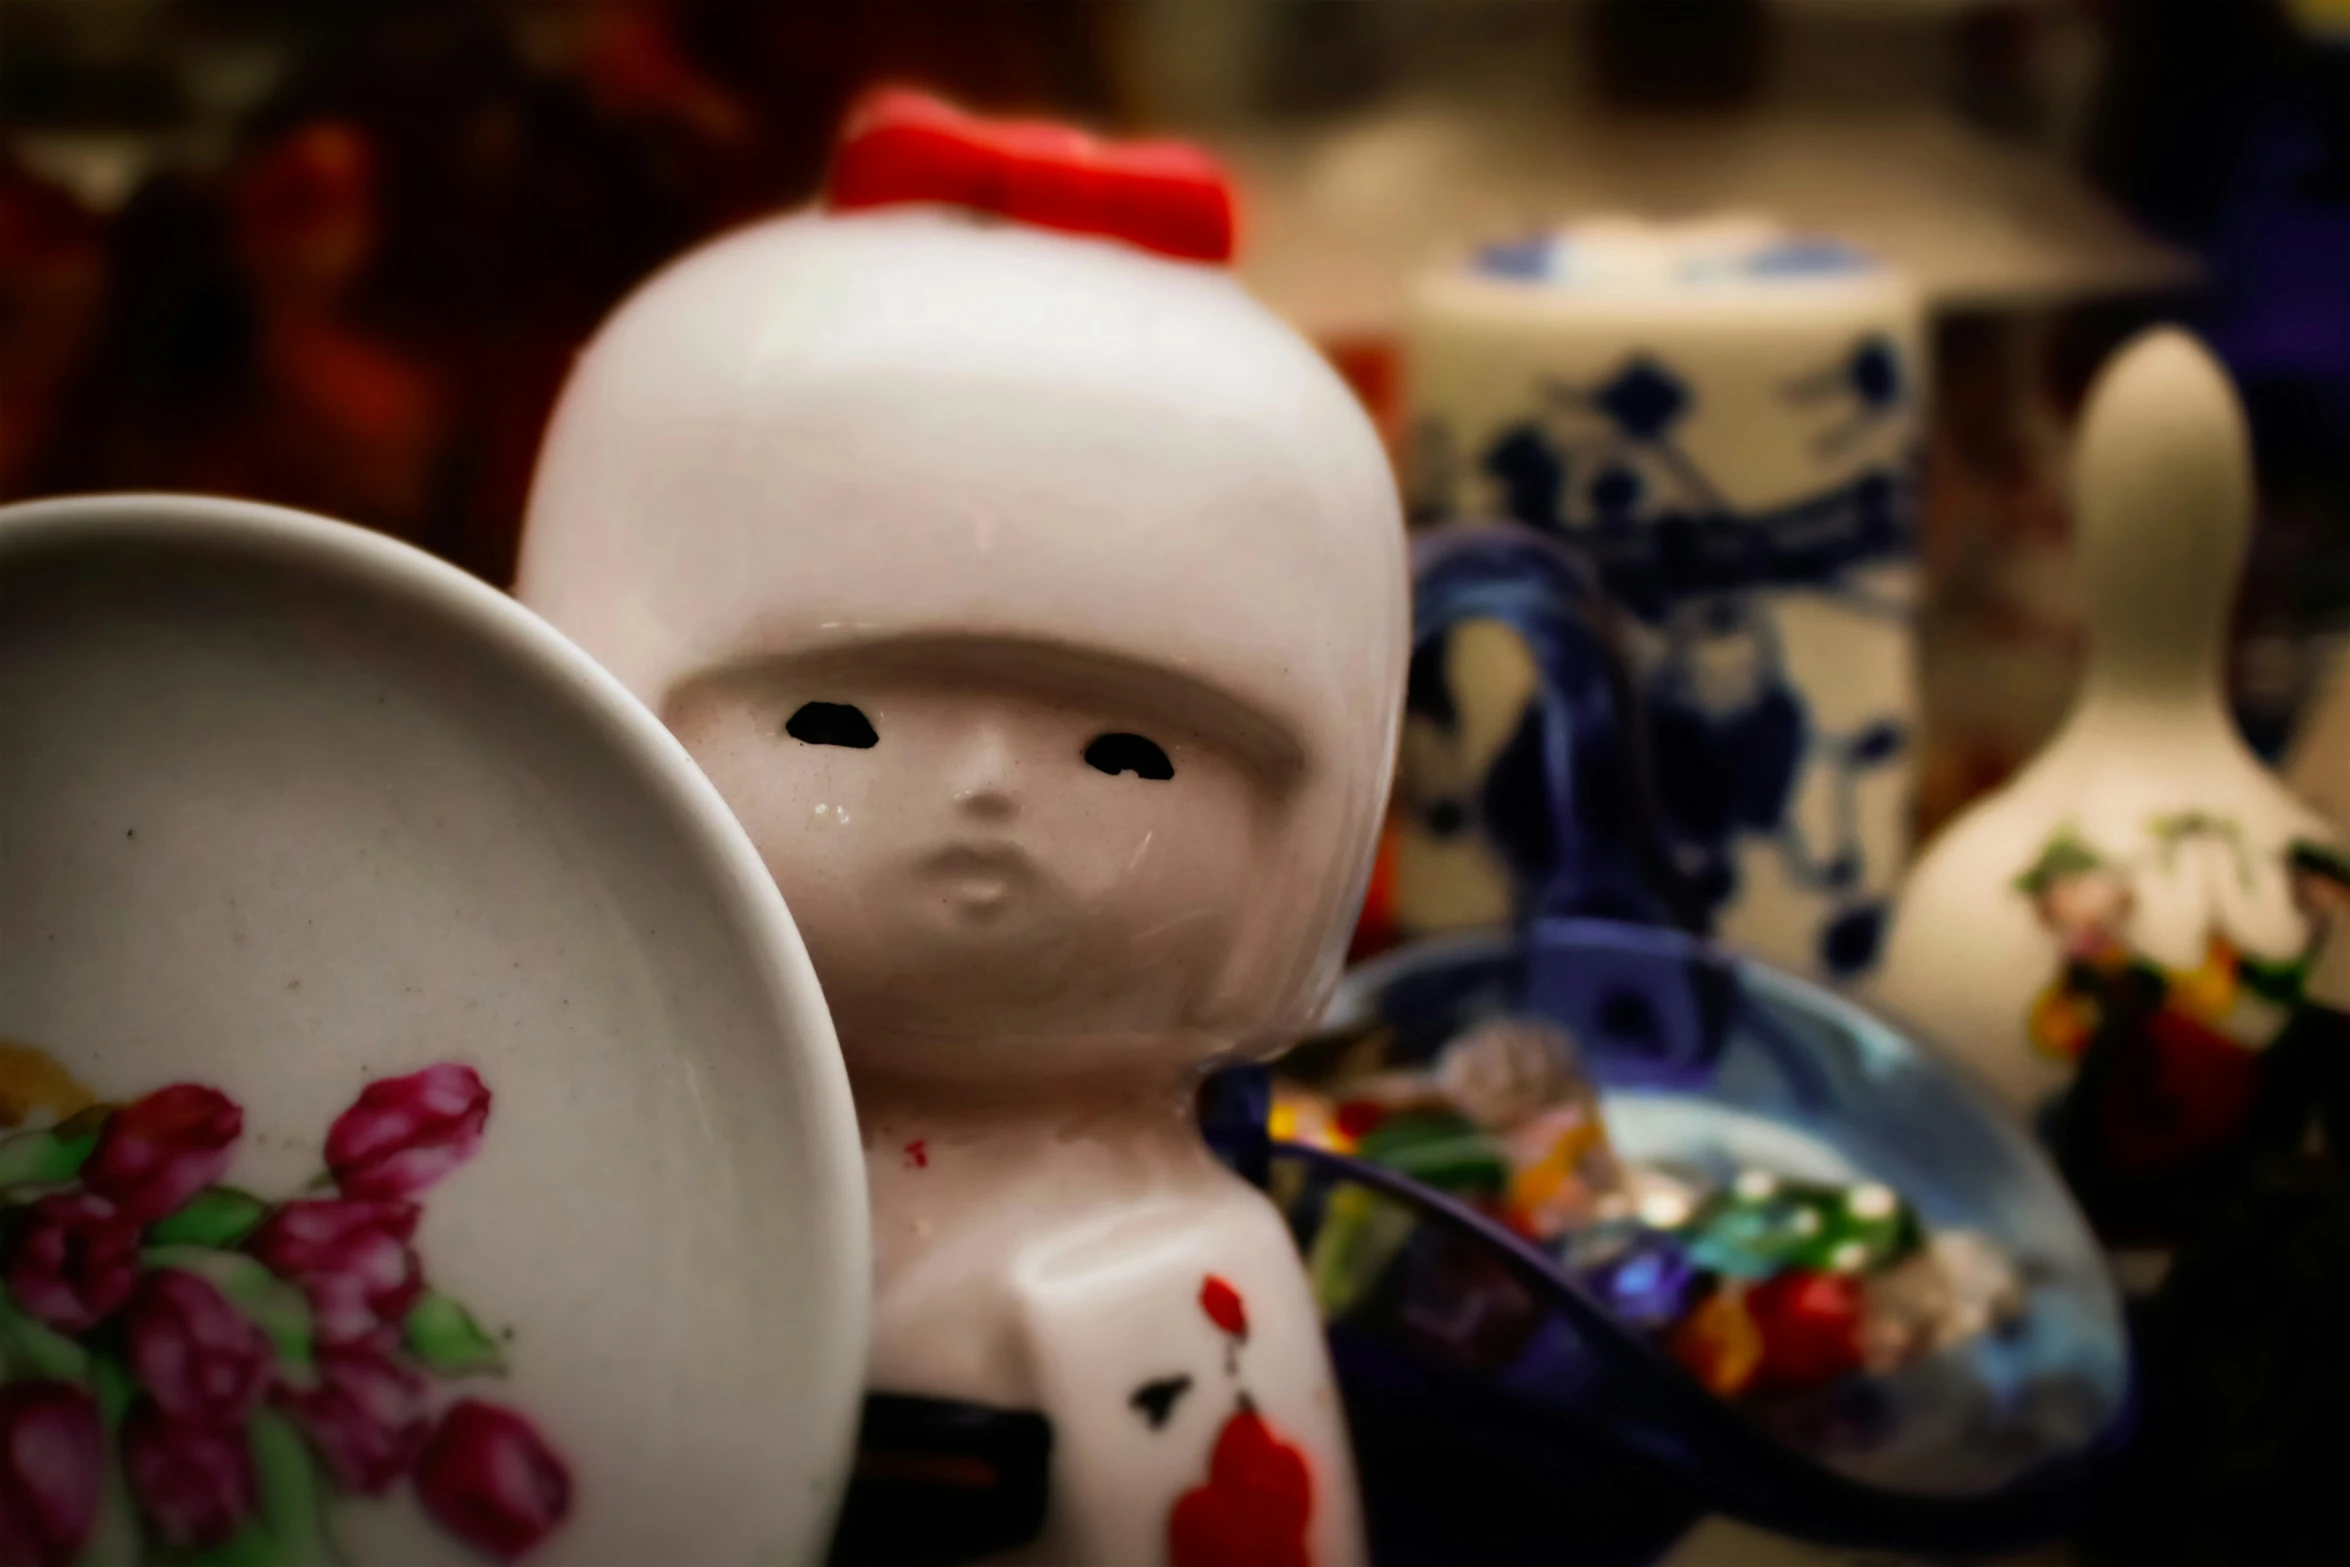 a close up view of a ceramic toy next to other pottery pieces